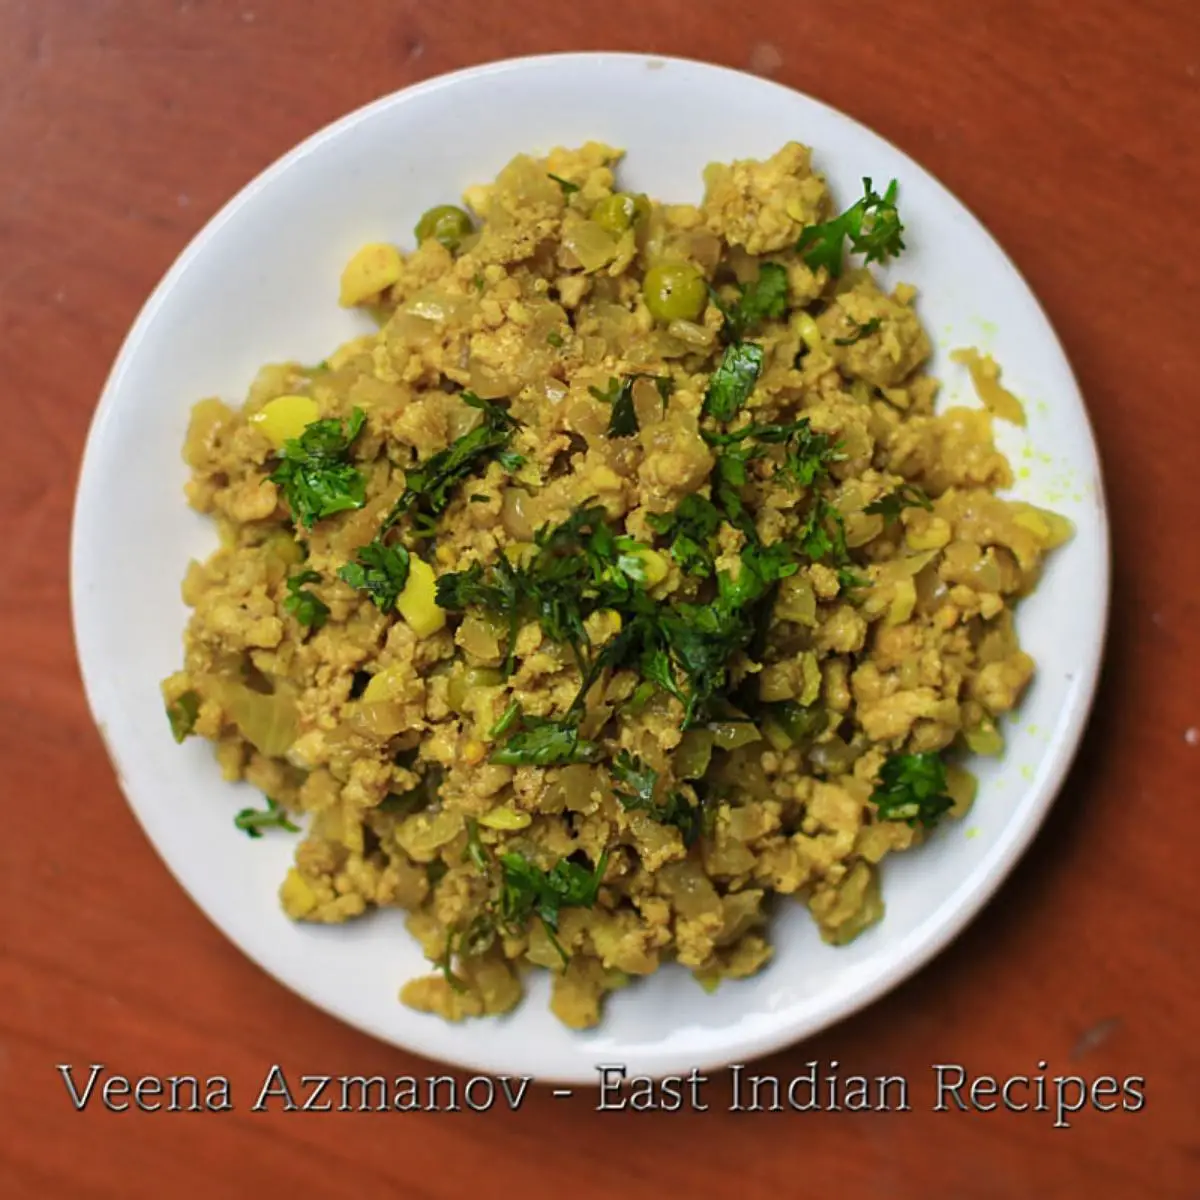 Ground chicken with Indian spices on a plate.